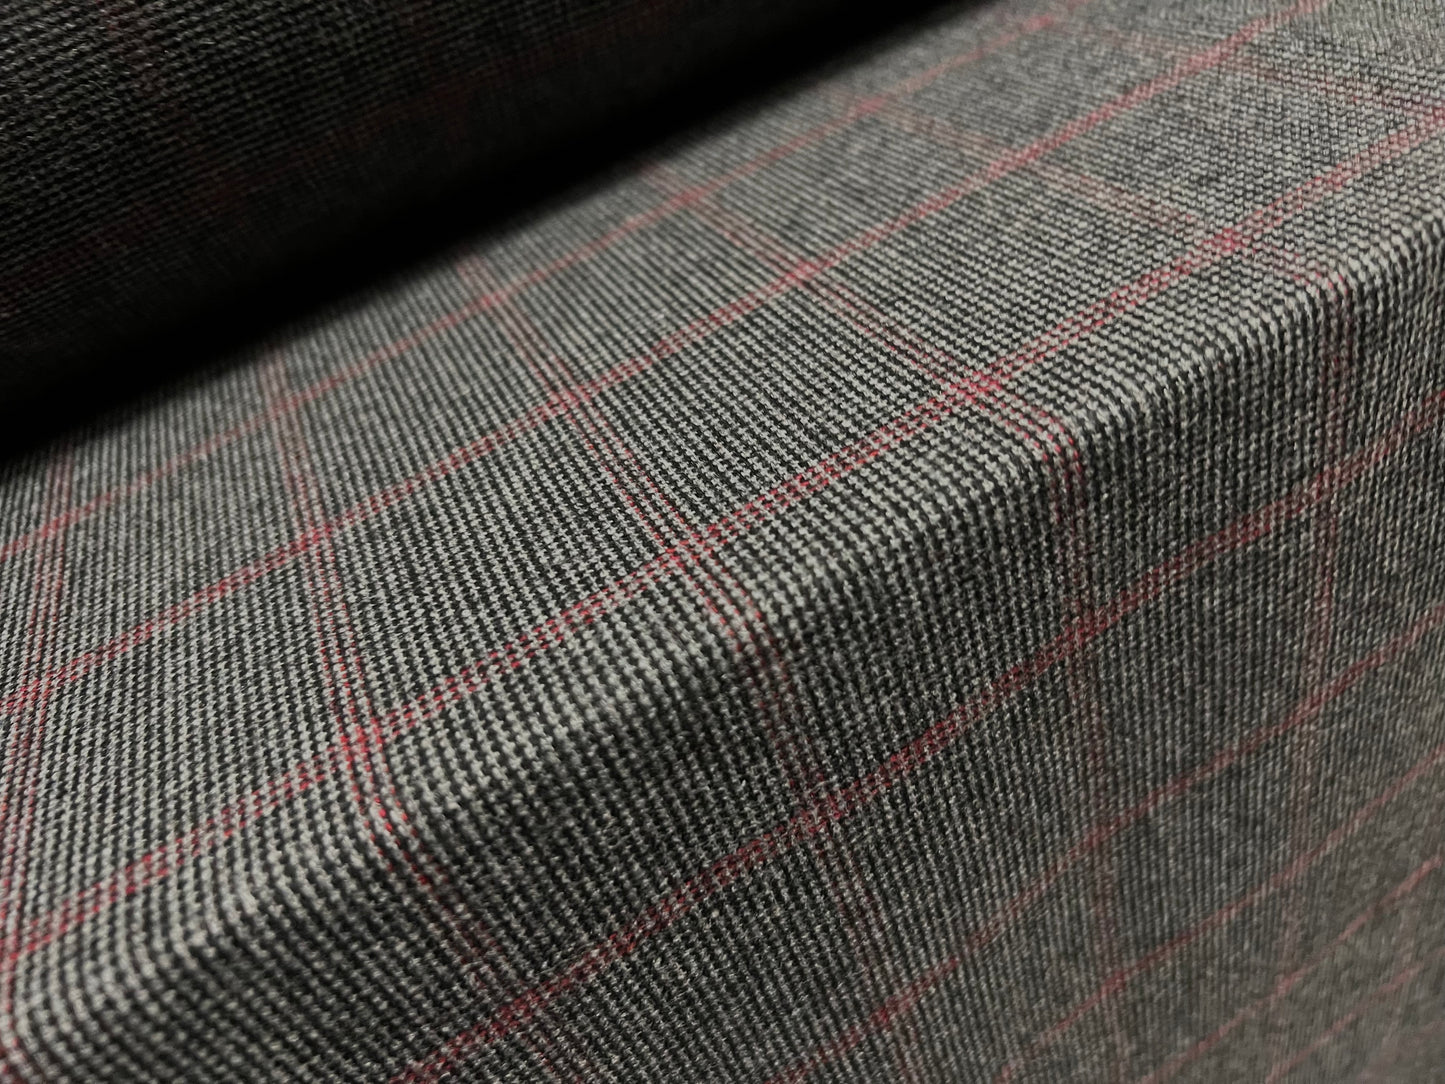 Wool blend tweed woven suit jacket fabric, per metre - fine check - grey & red